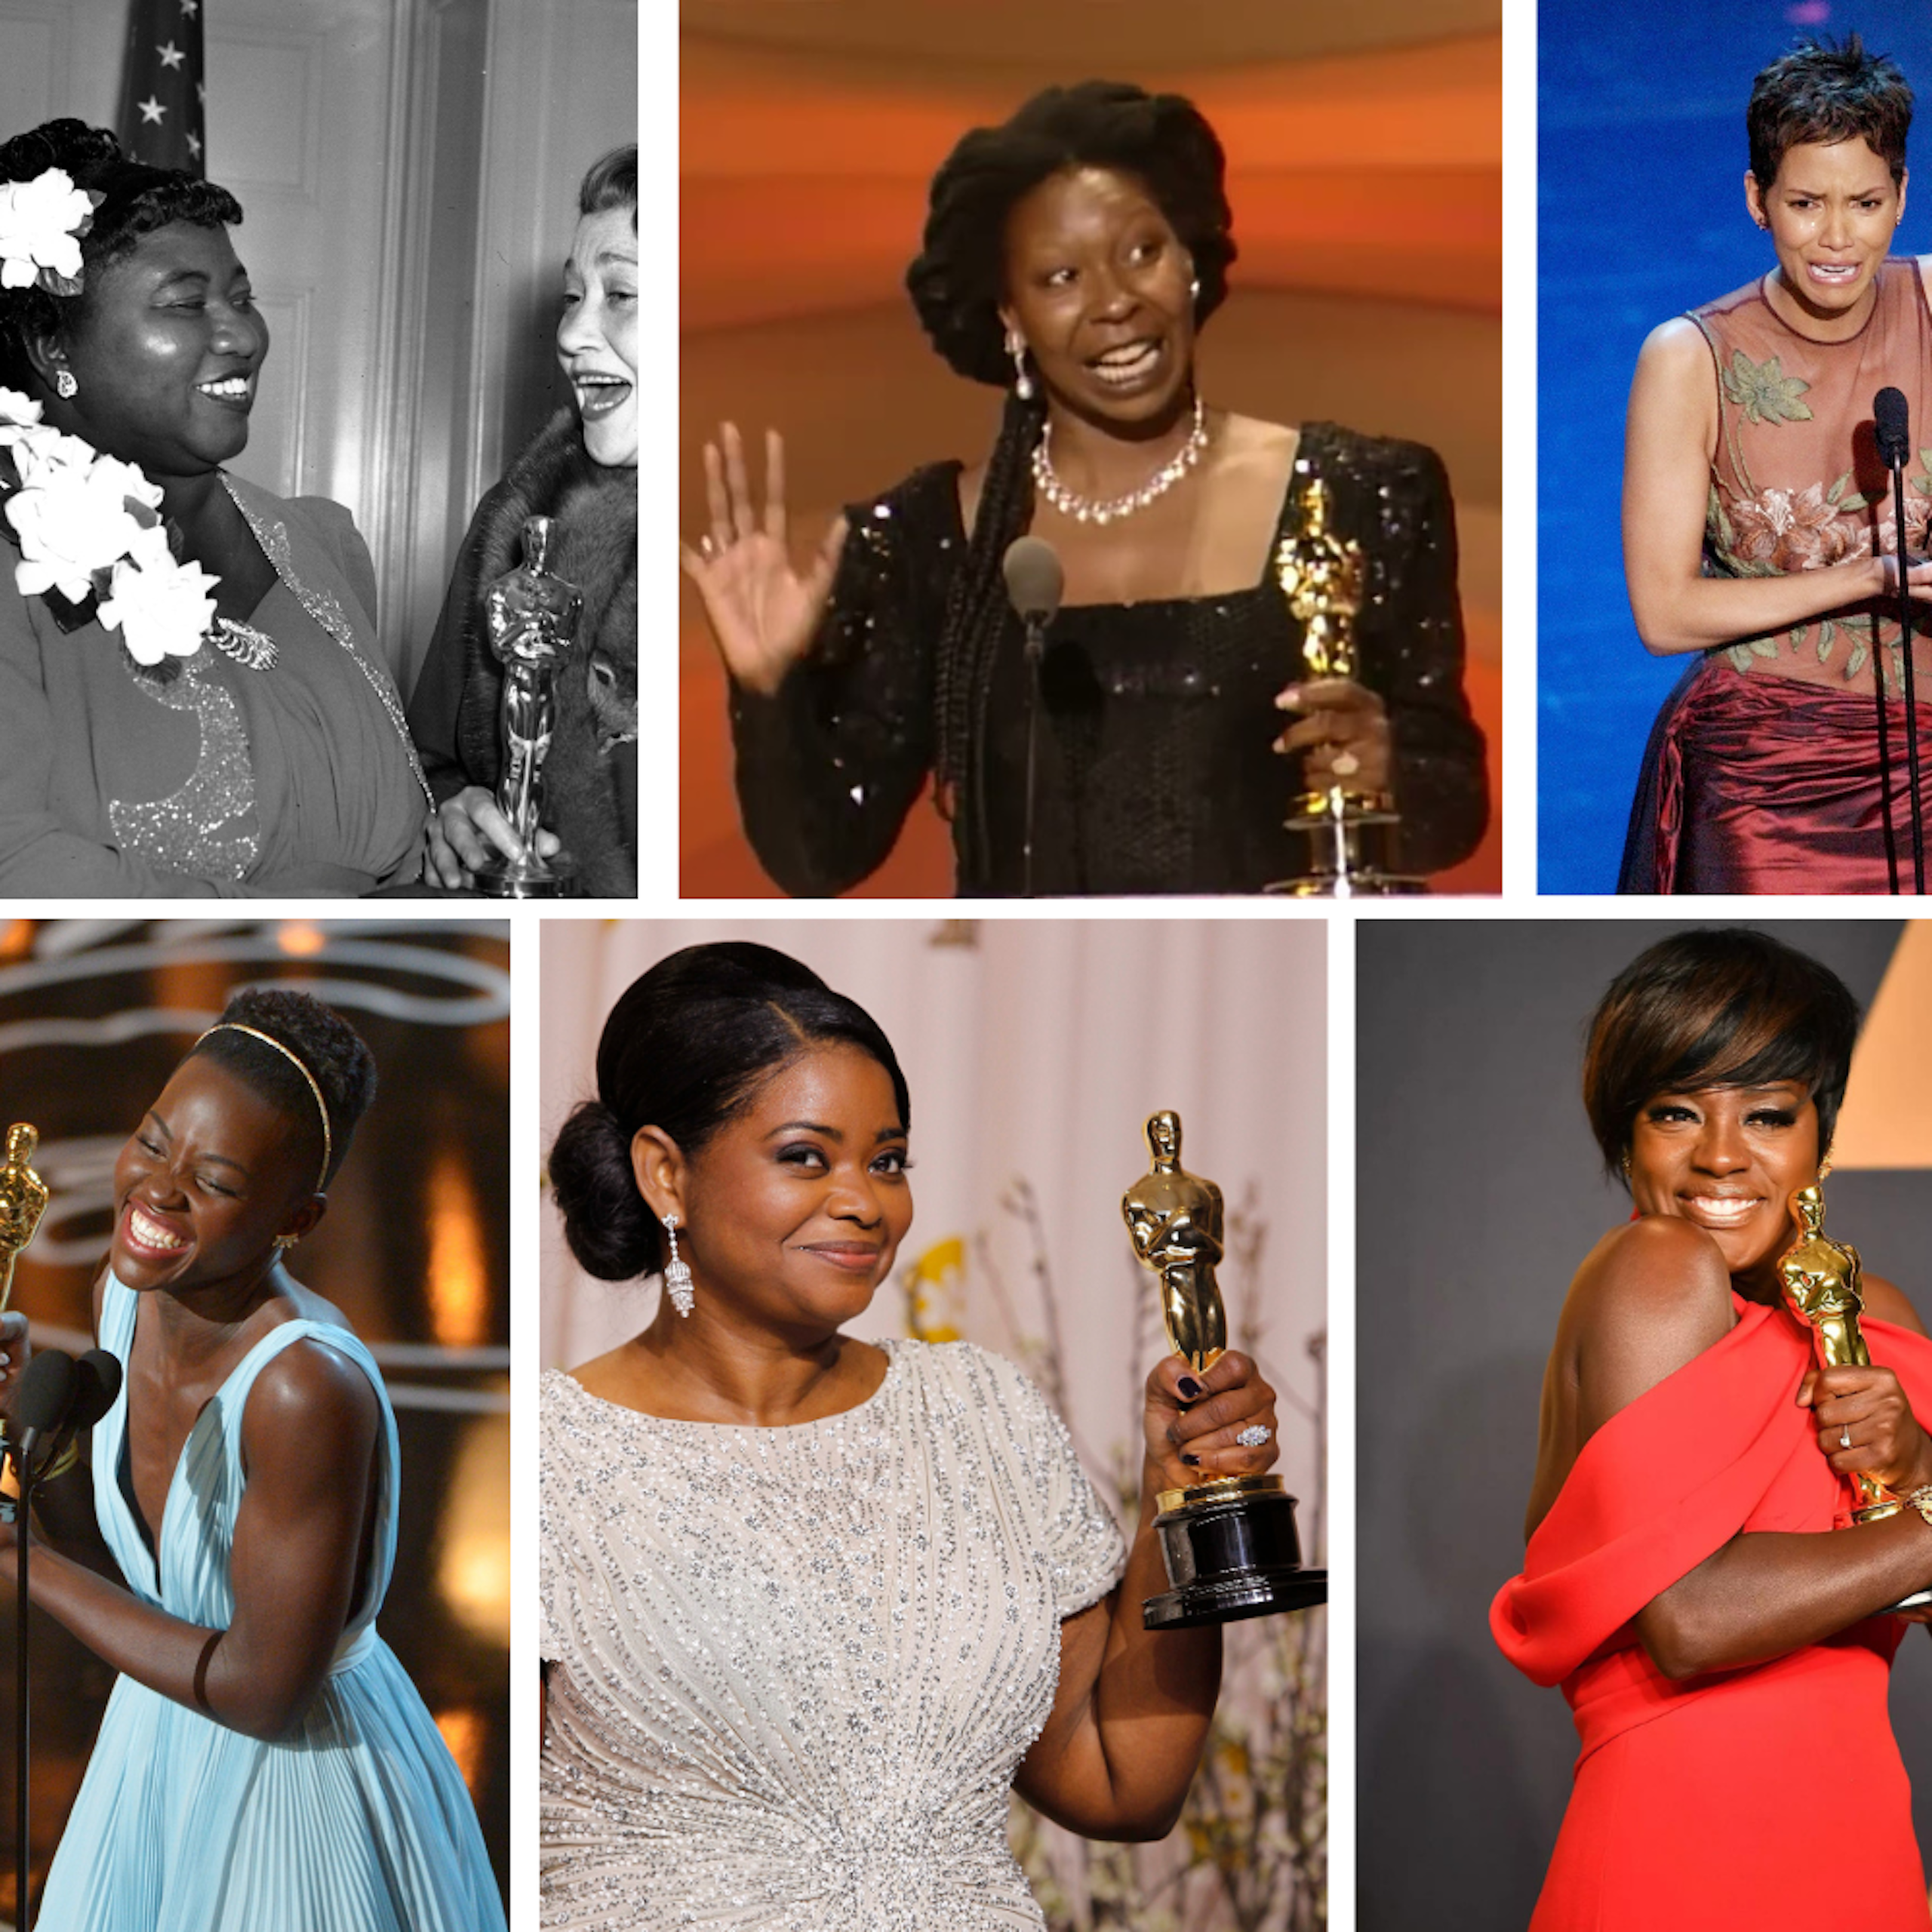 Nine years after #OscarsSoWhite, a look at what’s changed